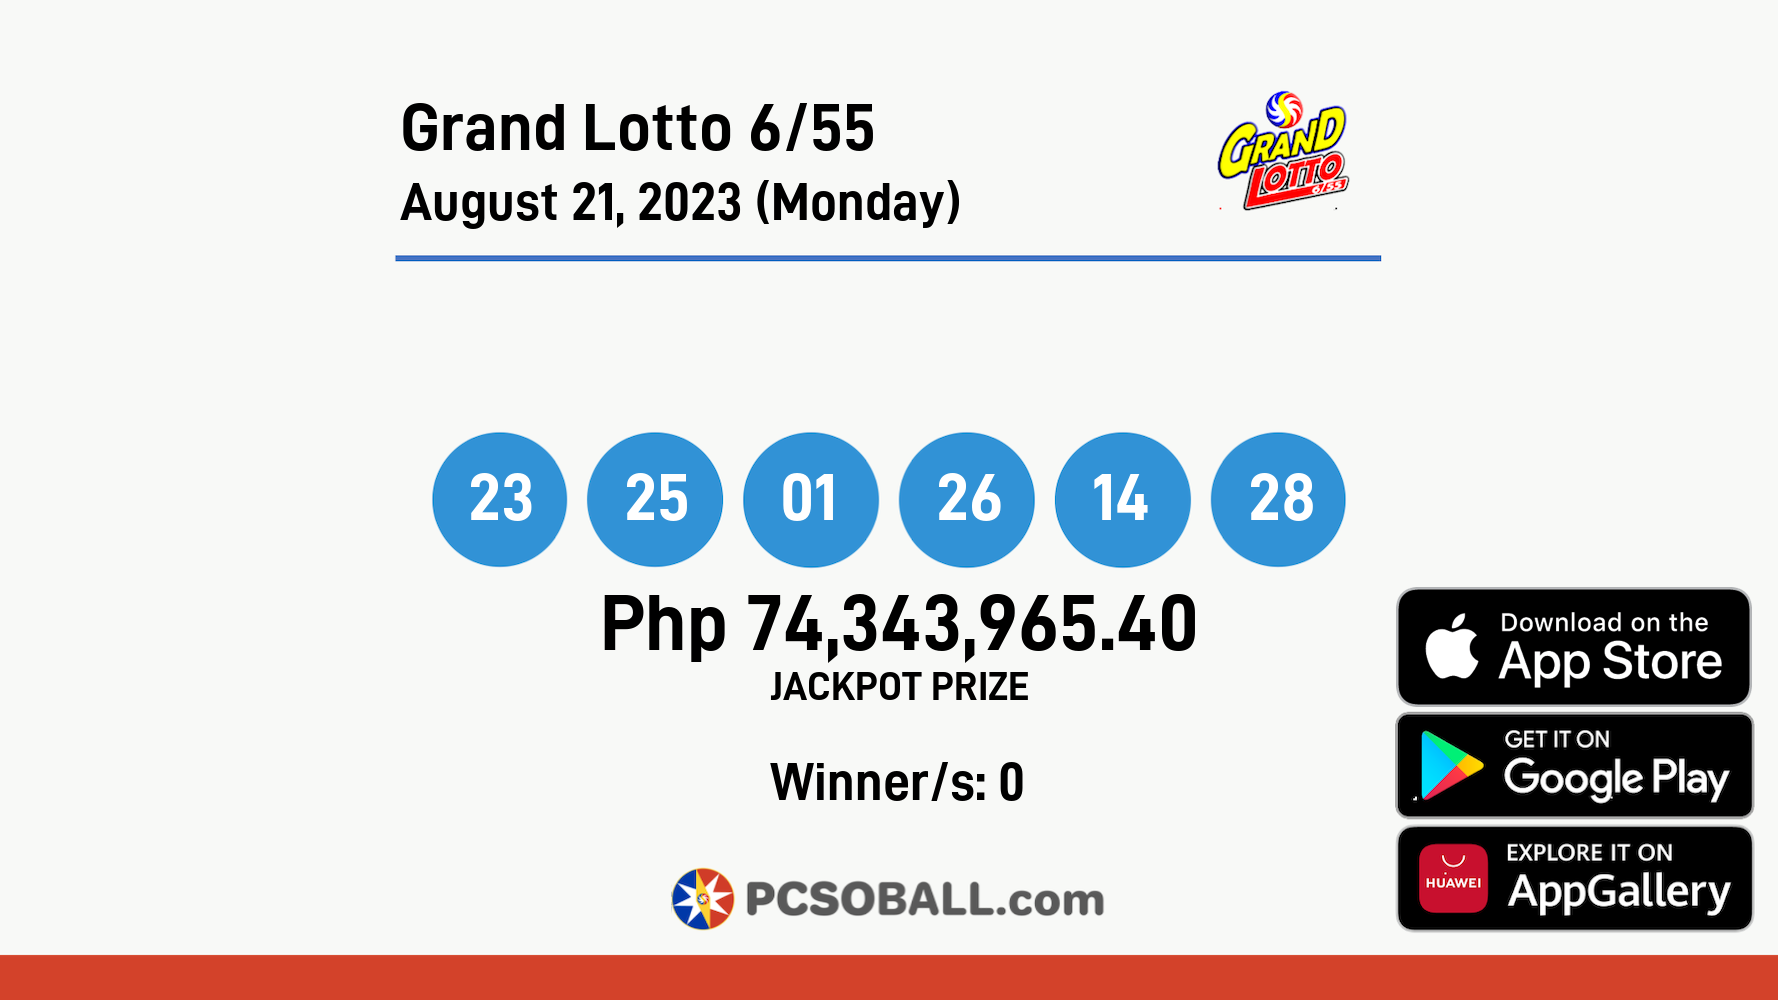 Grand Lotto 6/55 August 21, 2023 (Monday) Result